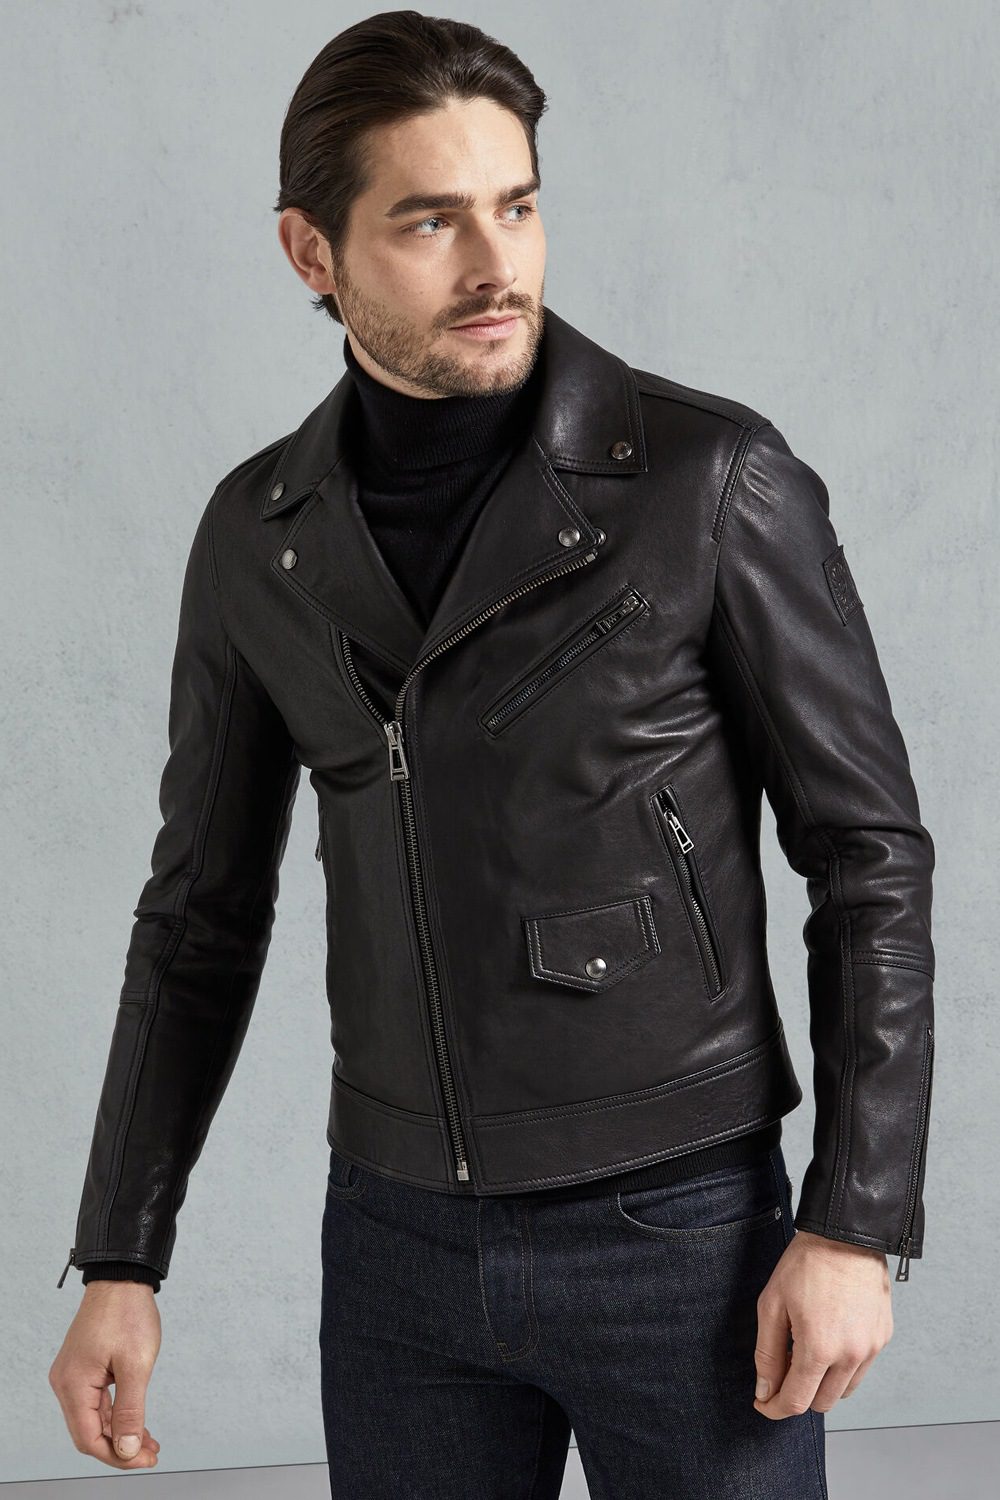 The Best Leather Jacket Brands For Men, Most Expensive Leather Motorcycle Jacket